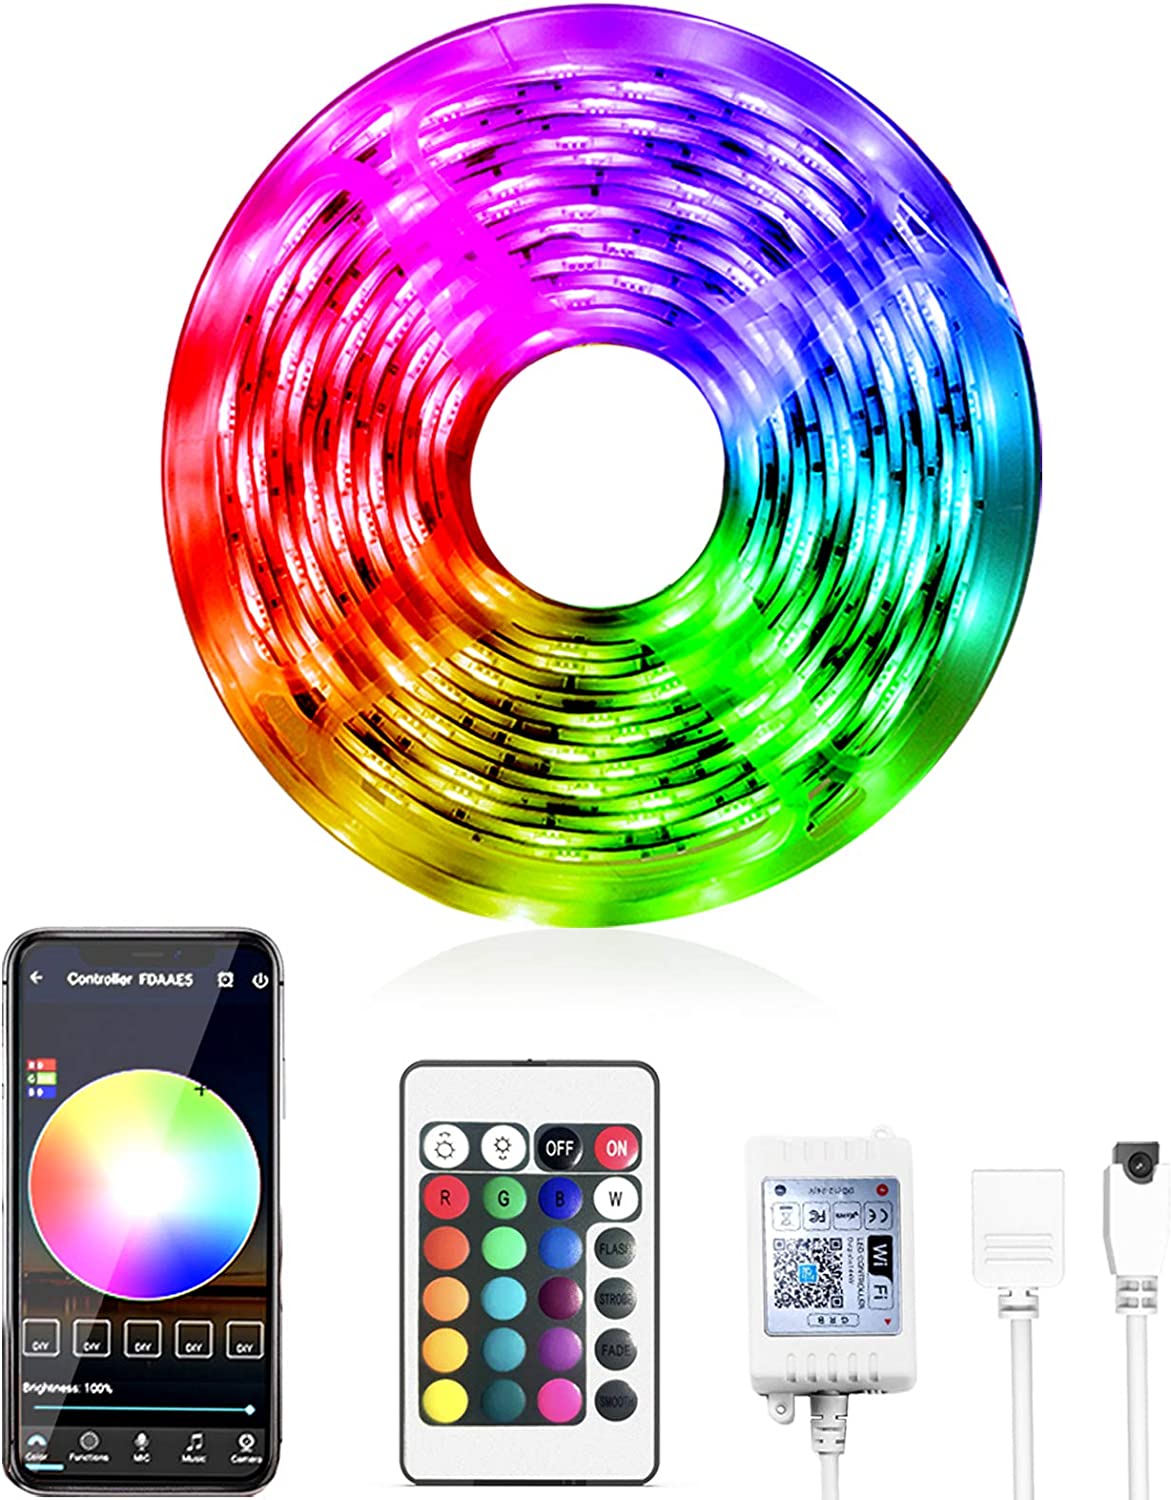 DAYBETTER Smart WiFi App Control Led Strip Lights Work with Alexa Google Assistant -16.4 feet